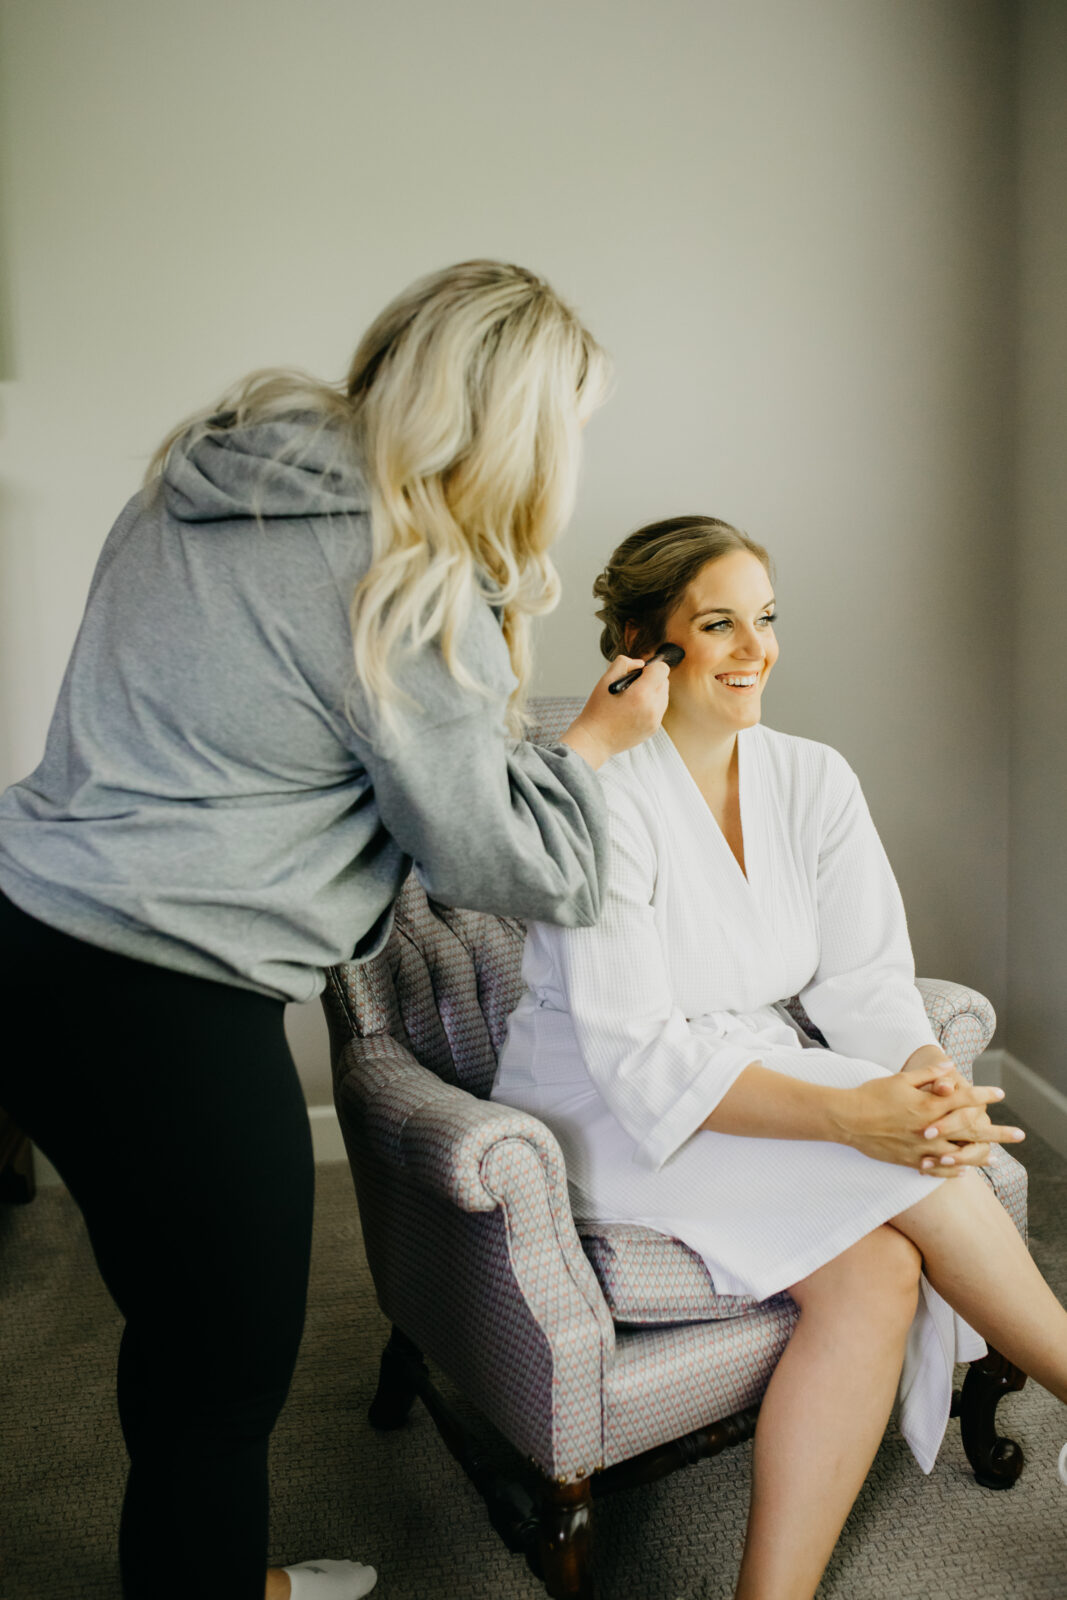 A photo of the bride with her makeup artist during the preparation of her wedding day